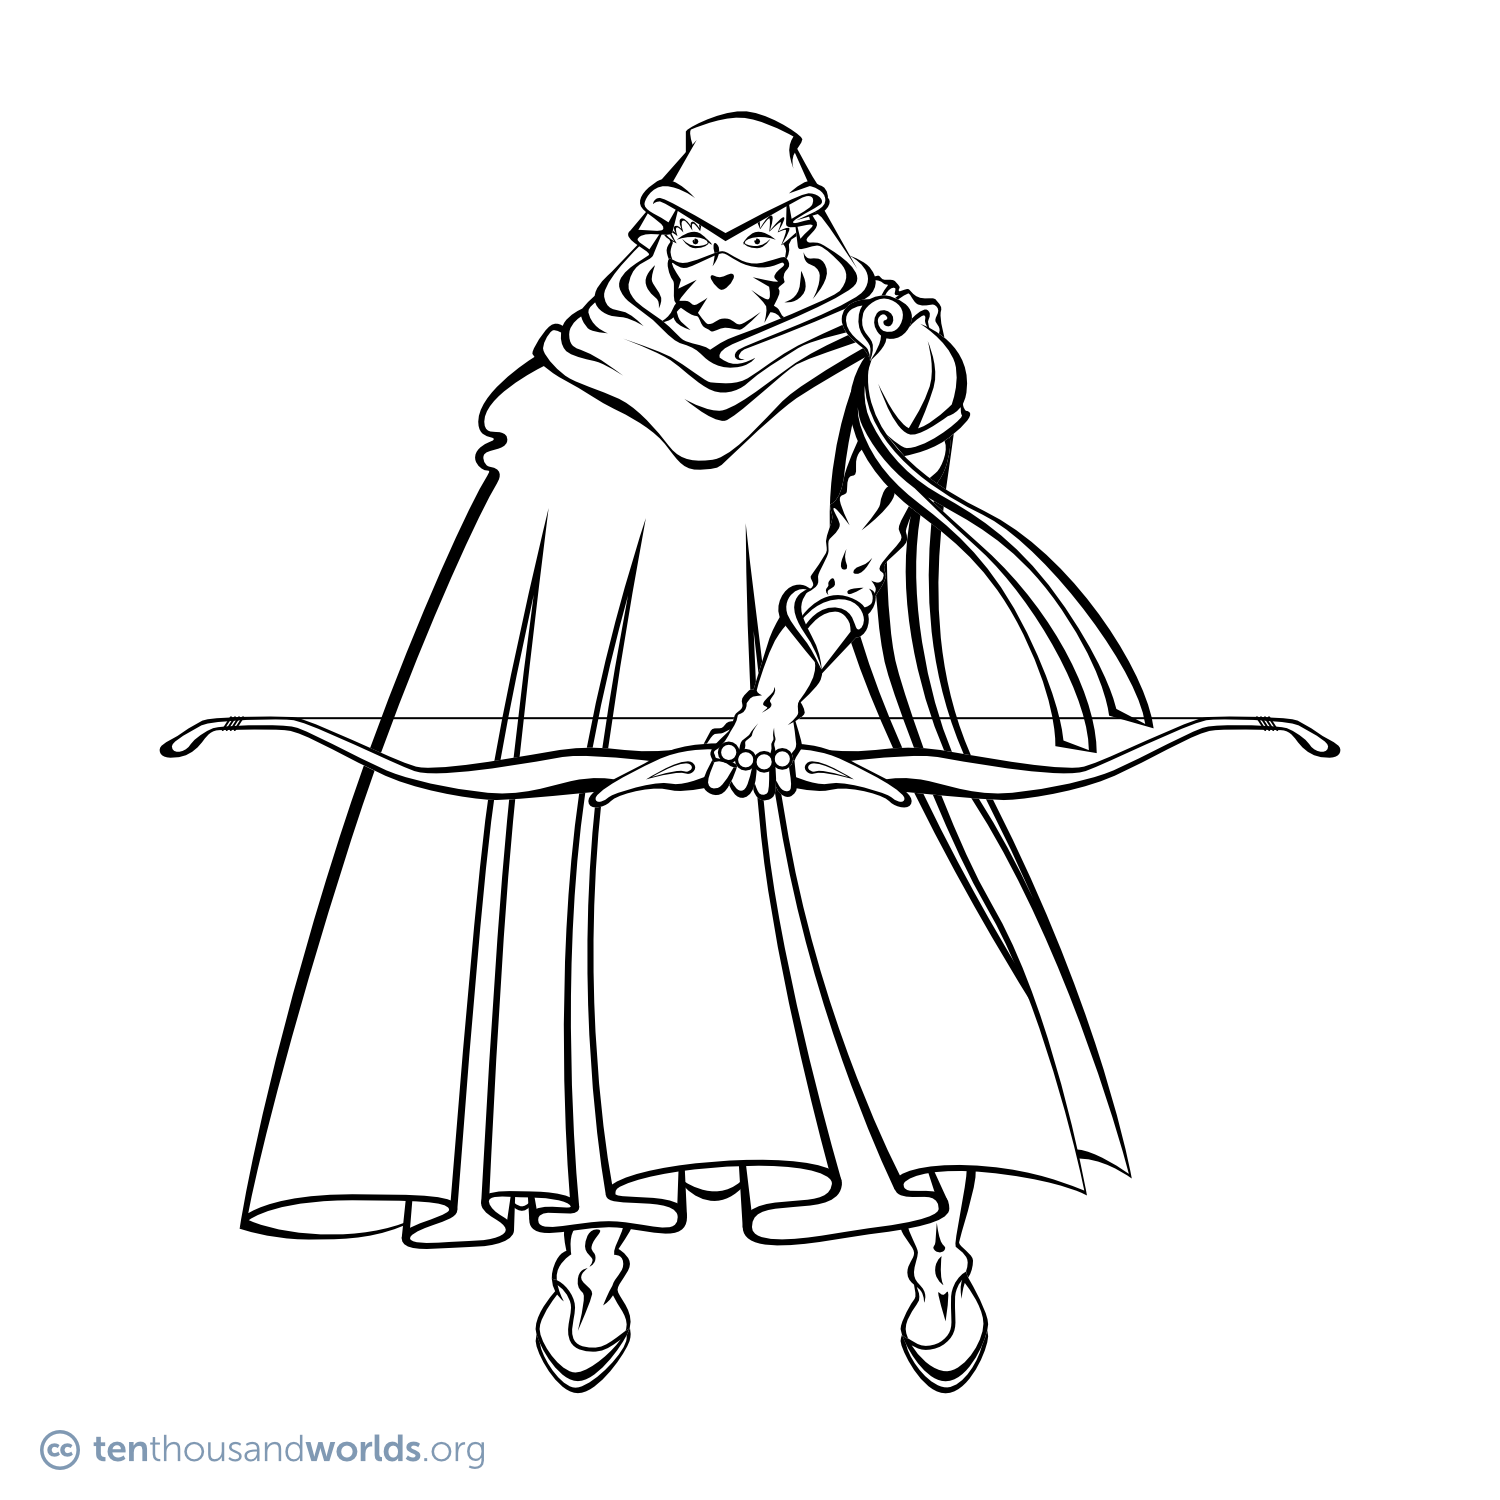 An ink drawing of an almost fully-cloaked figure, with one arm free, holding a bow.